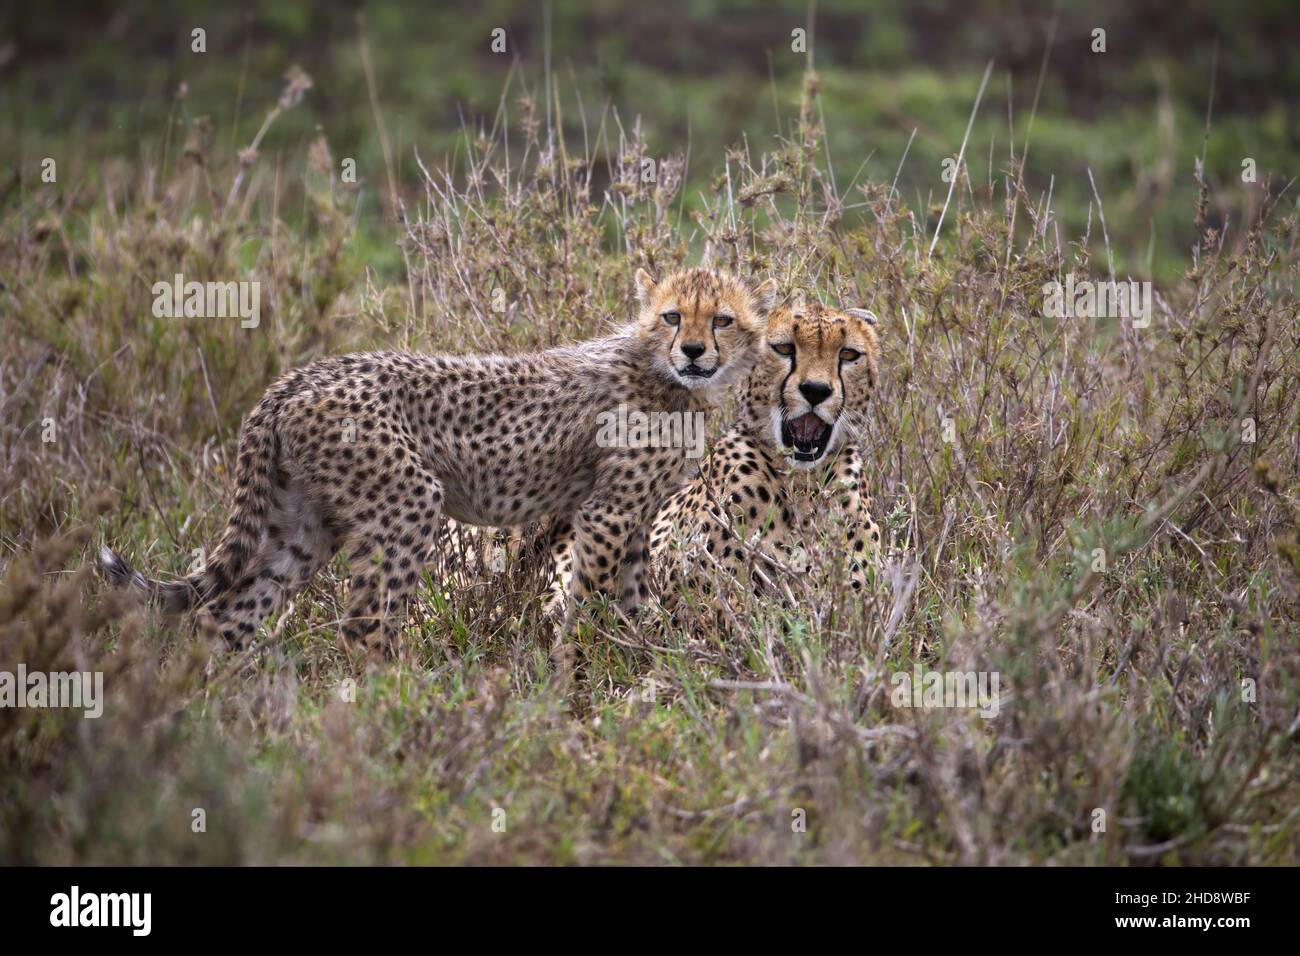 Closeup of two East African Cheetahs in a field under the sunlight in Tanzania Stock Photo